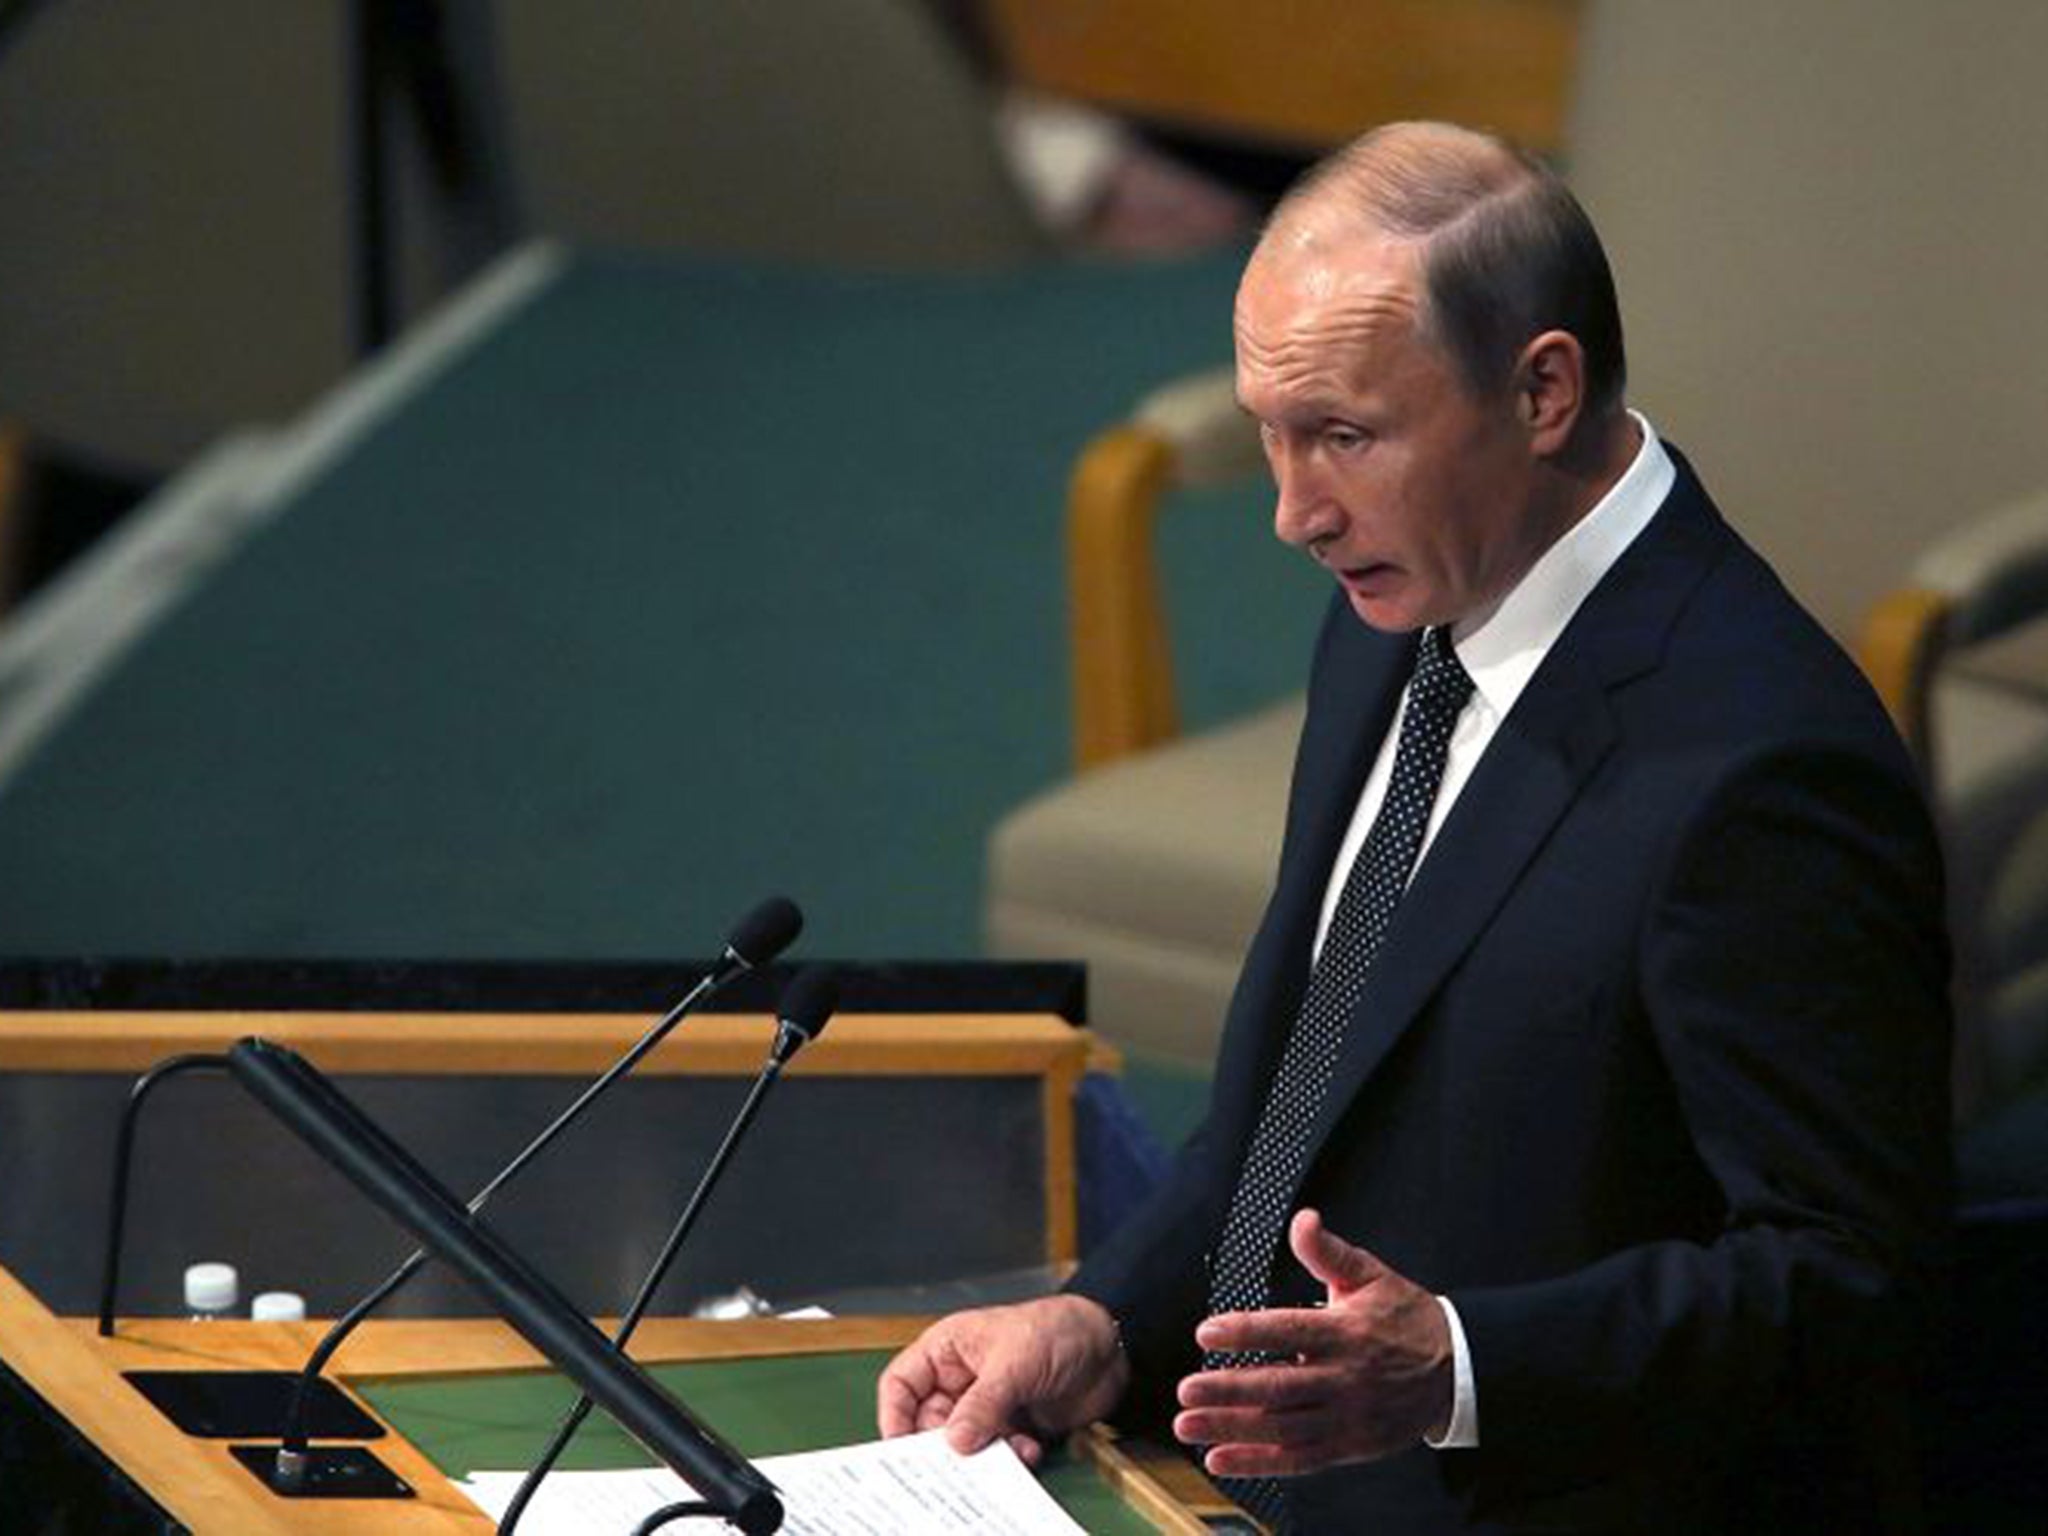 In his speech, Vladimir Putin urged the world to stick with Assad, arguing that his military is the only viable option for defeating the Islamic State